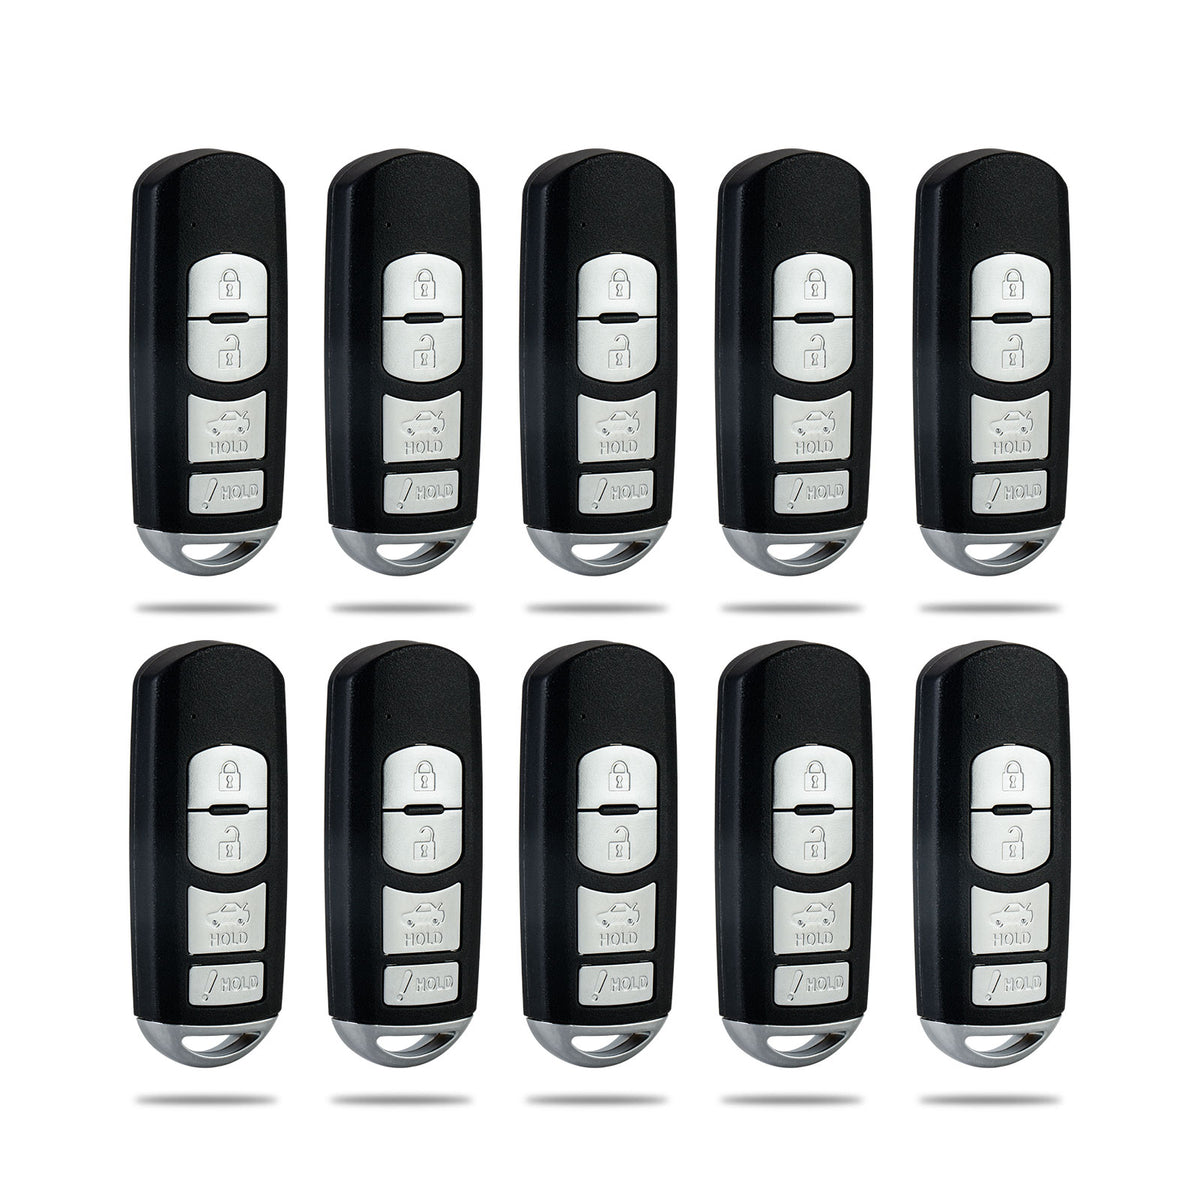 Lots of 10 Extra-Partss Remote Car Key Fob Replacement for WAZSKE13D01 fits 2014 2015 2016 2017 2018 Mazda 3 6